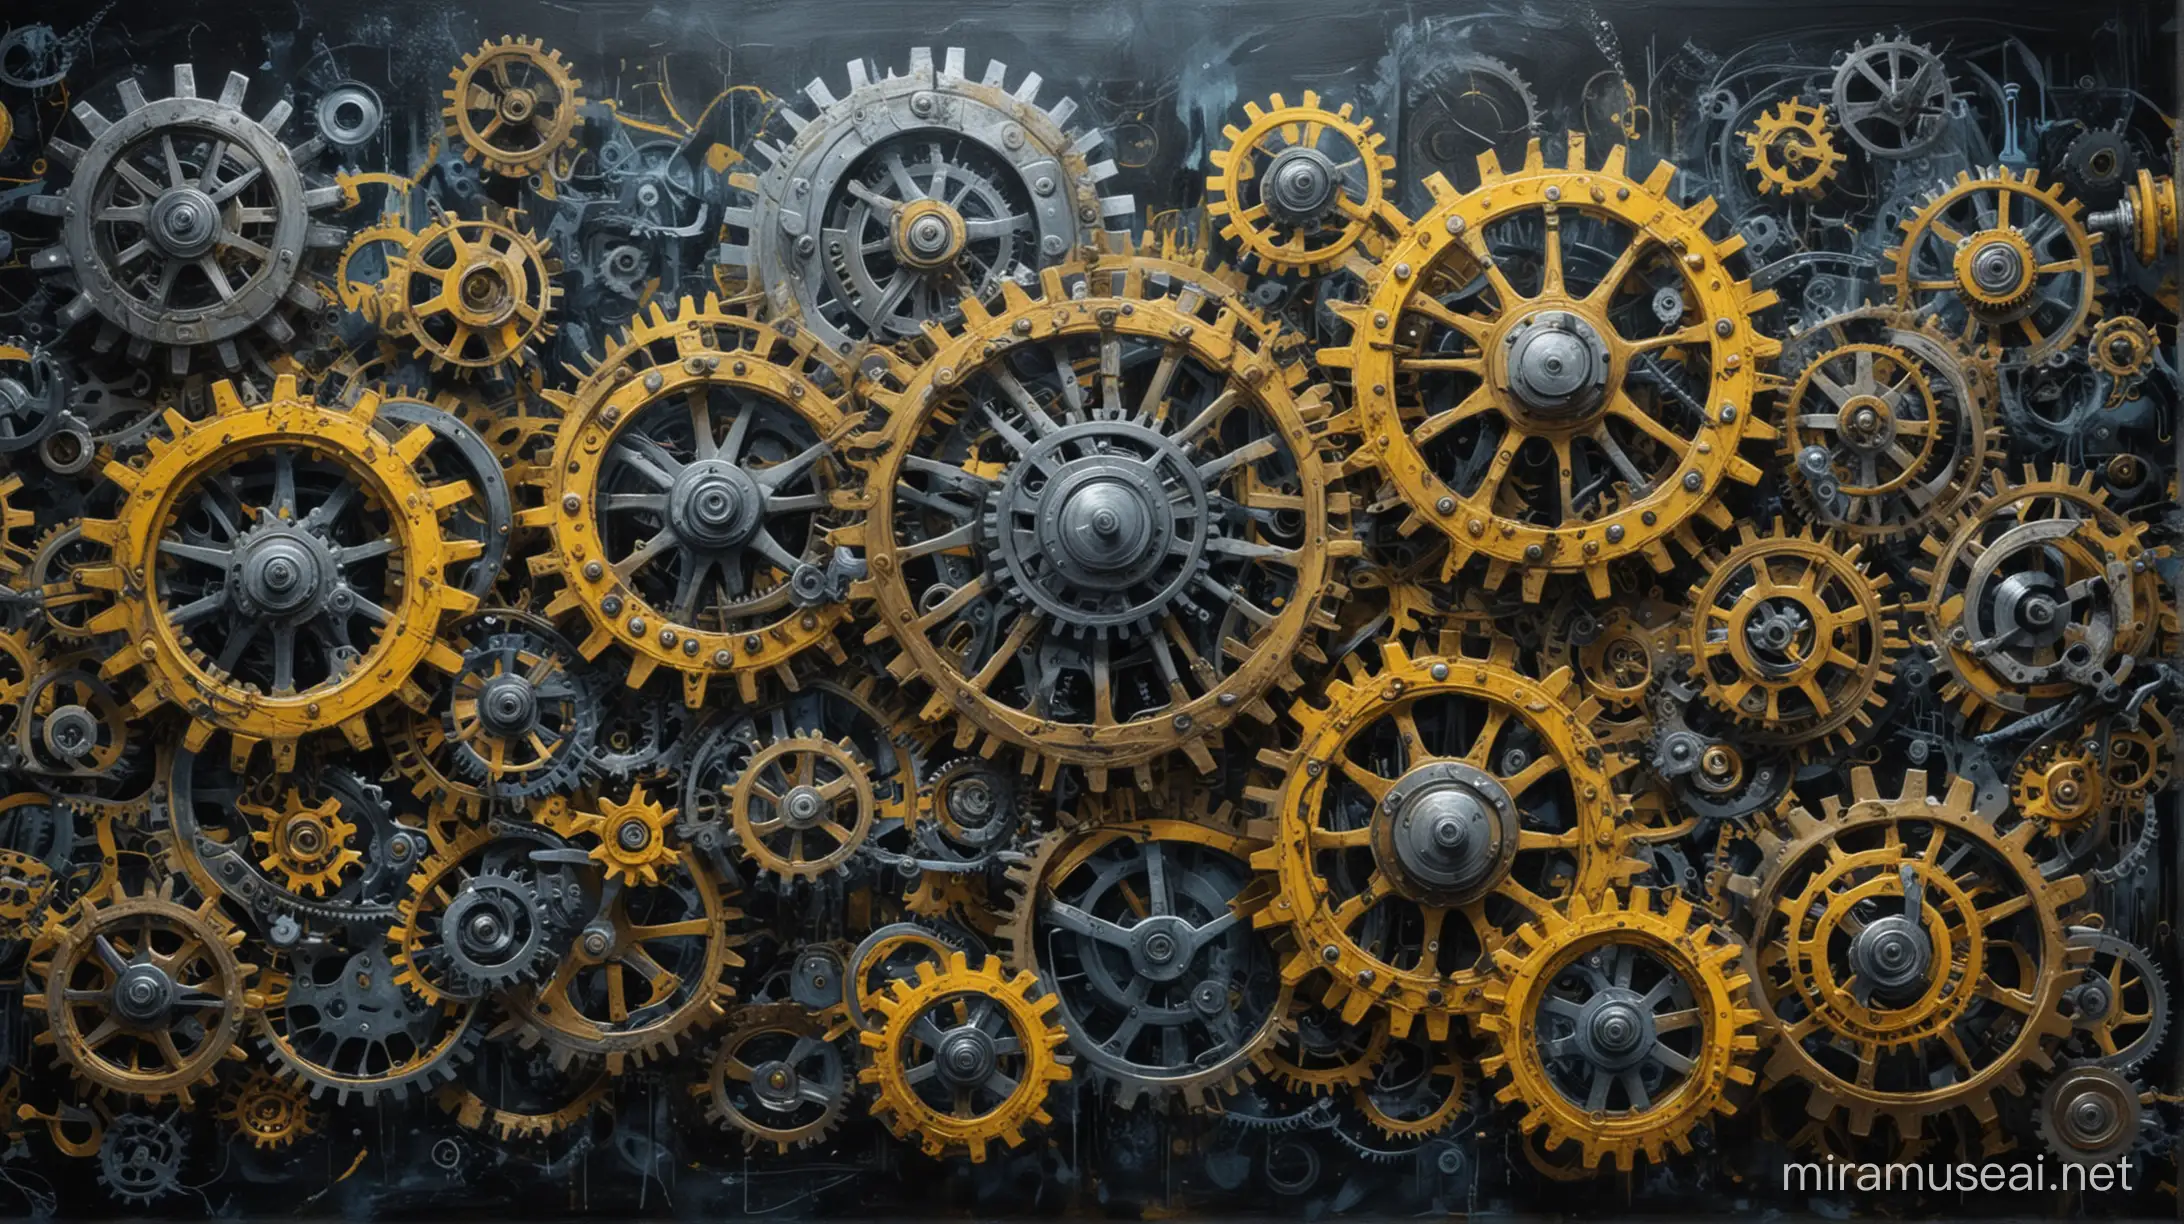 Background banner image, surreal painting, with lots of cogs and inner workings. Depicting part of the system moving into a new system titled EP1. Darks blues and yellow.